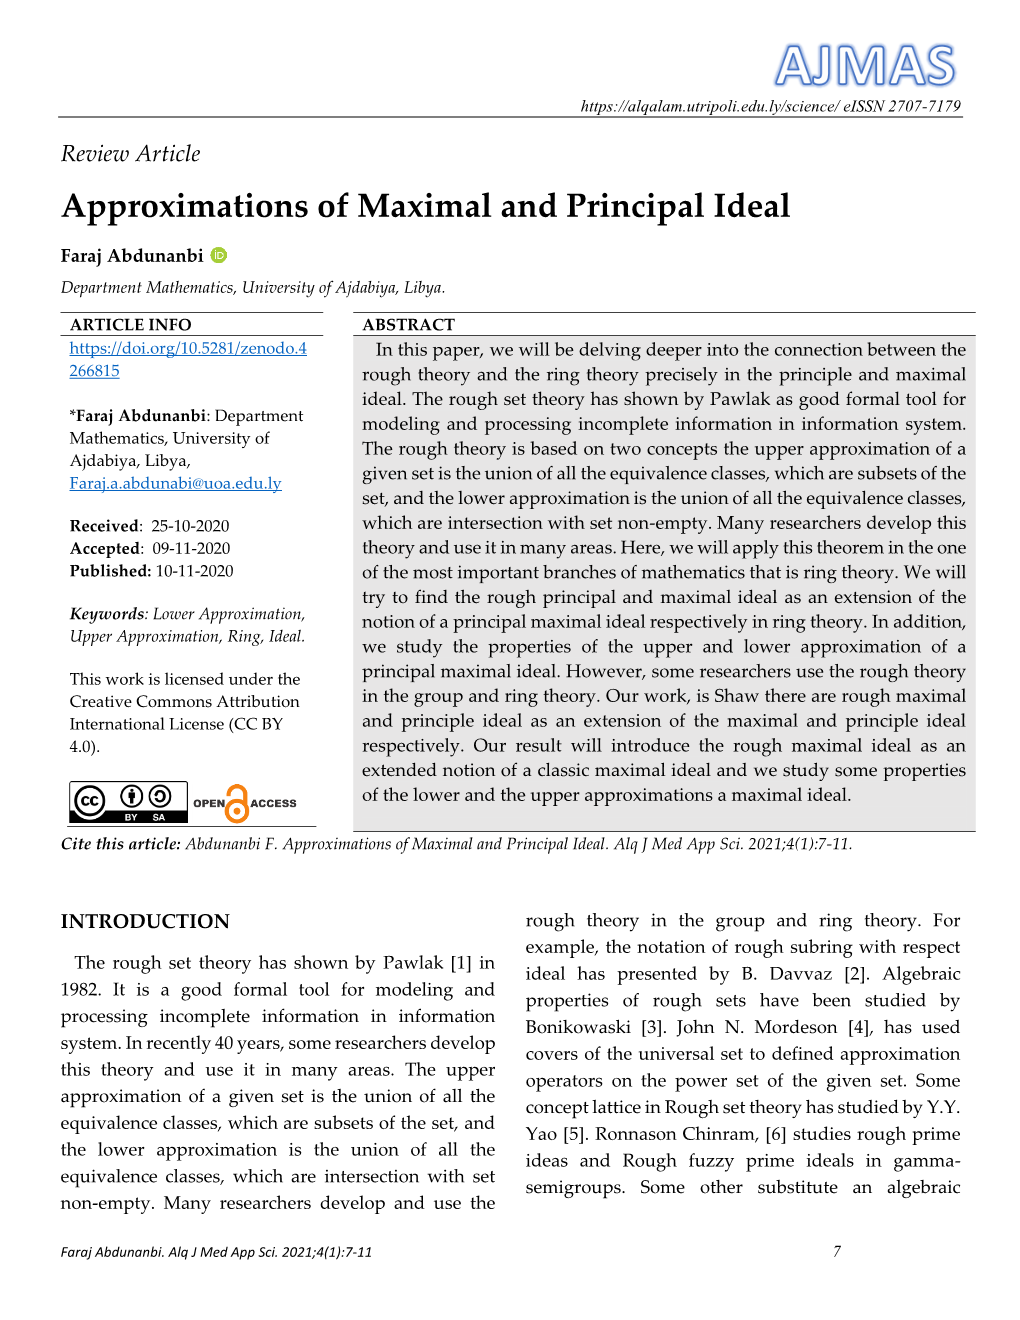 Approximations of Maximal and Principal Ideal